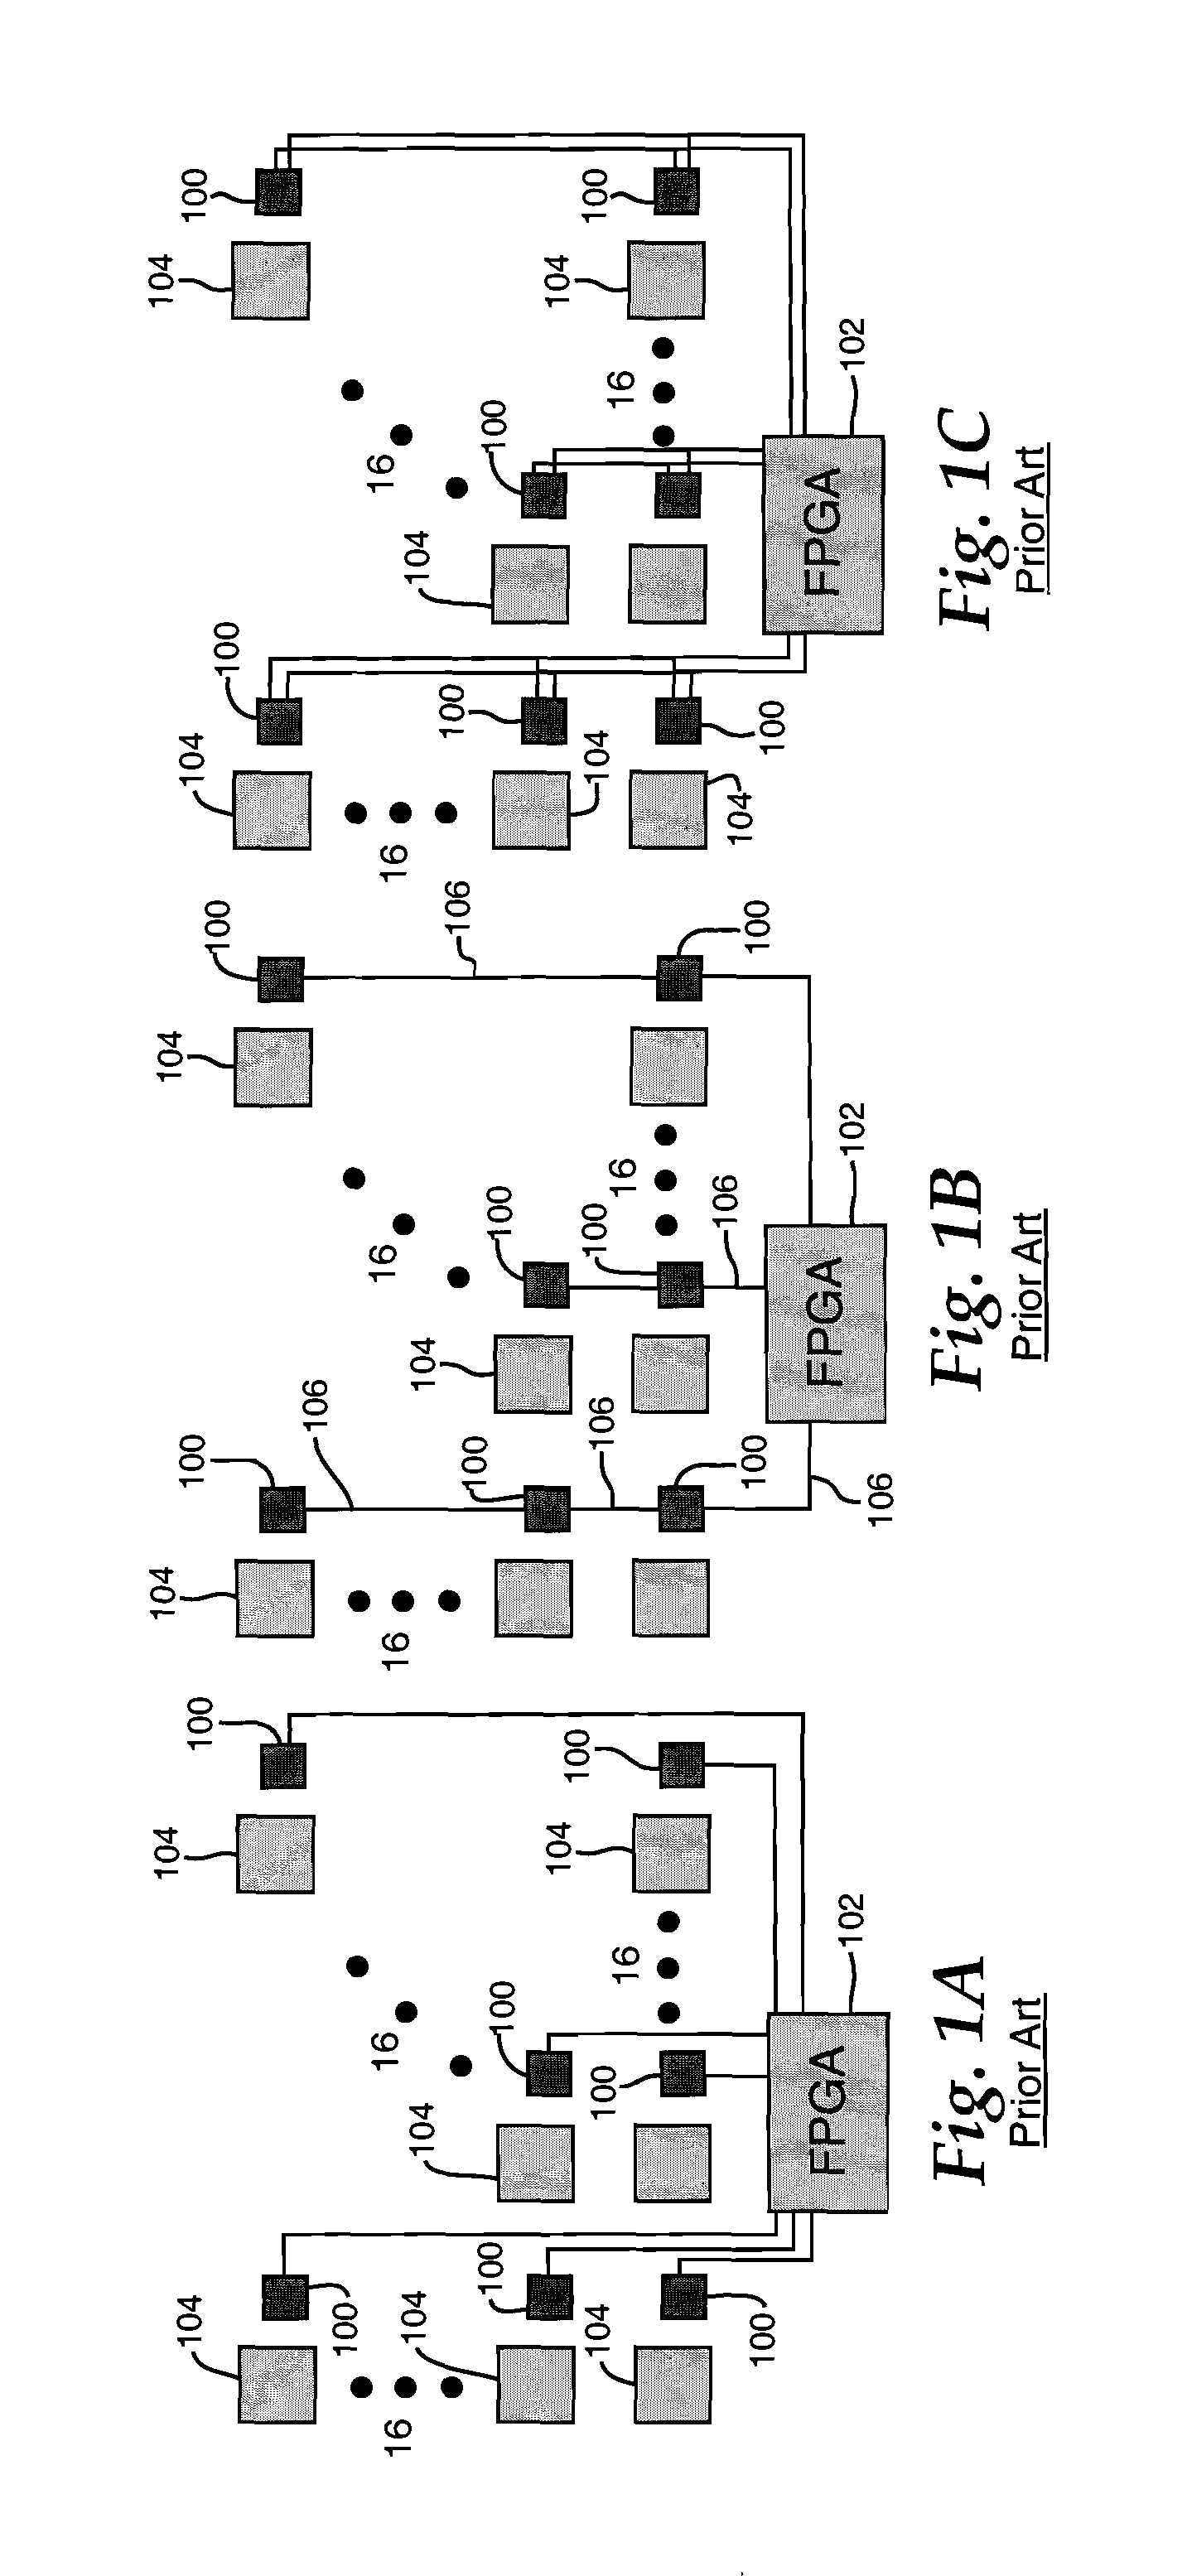 Scalable phased array beamsteering control system